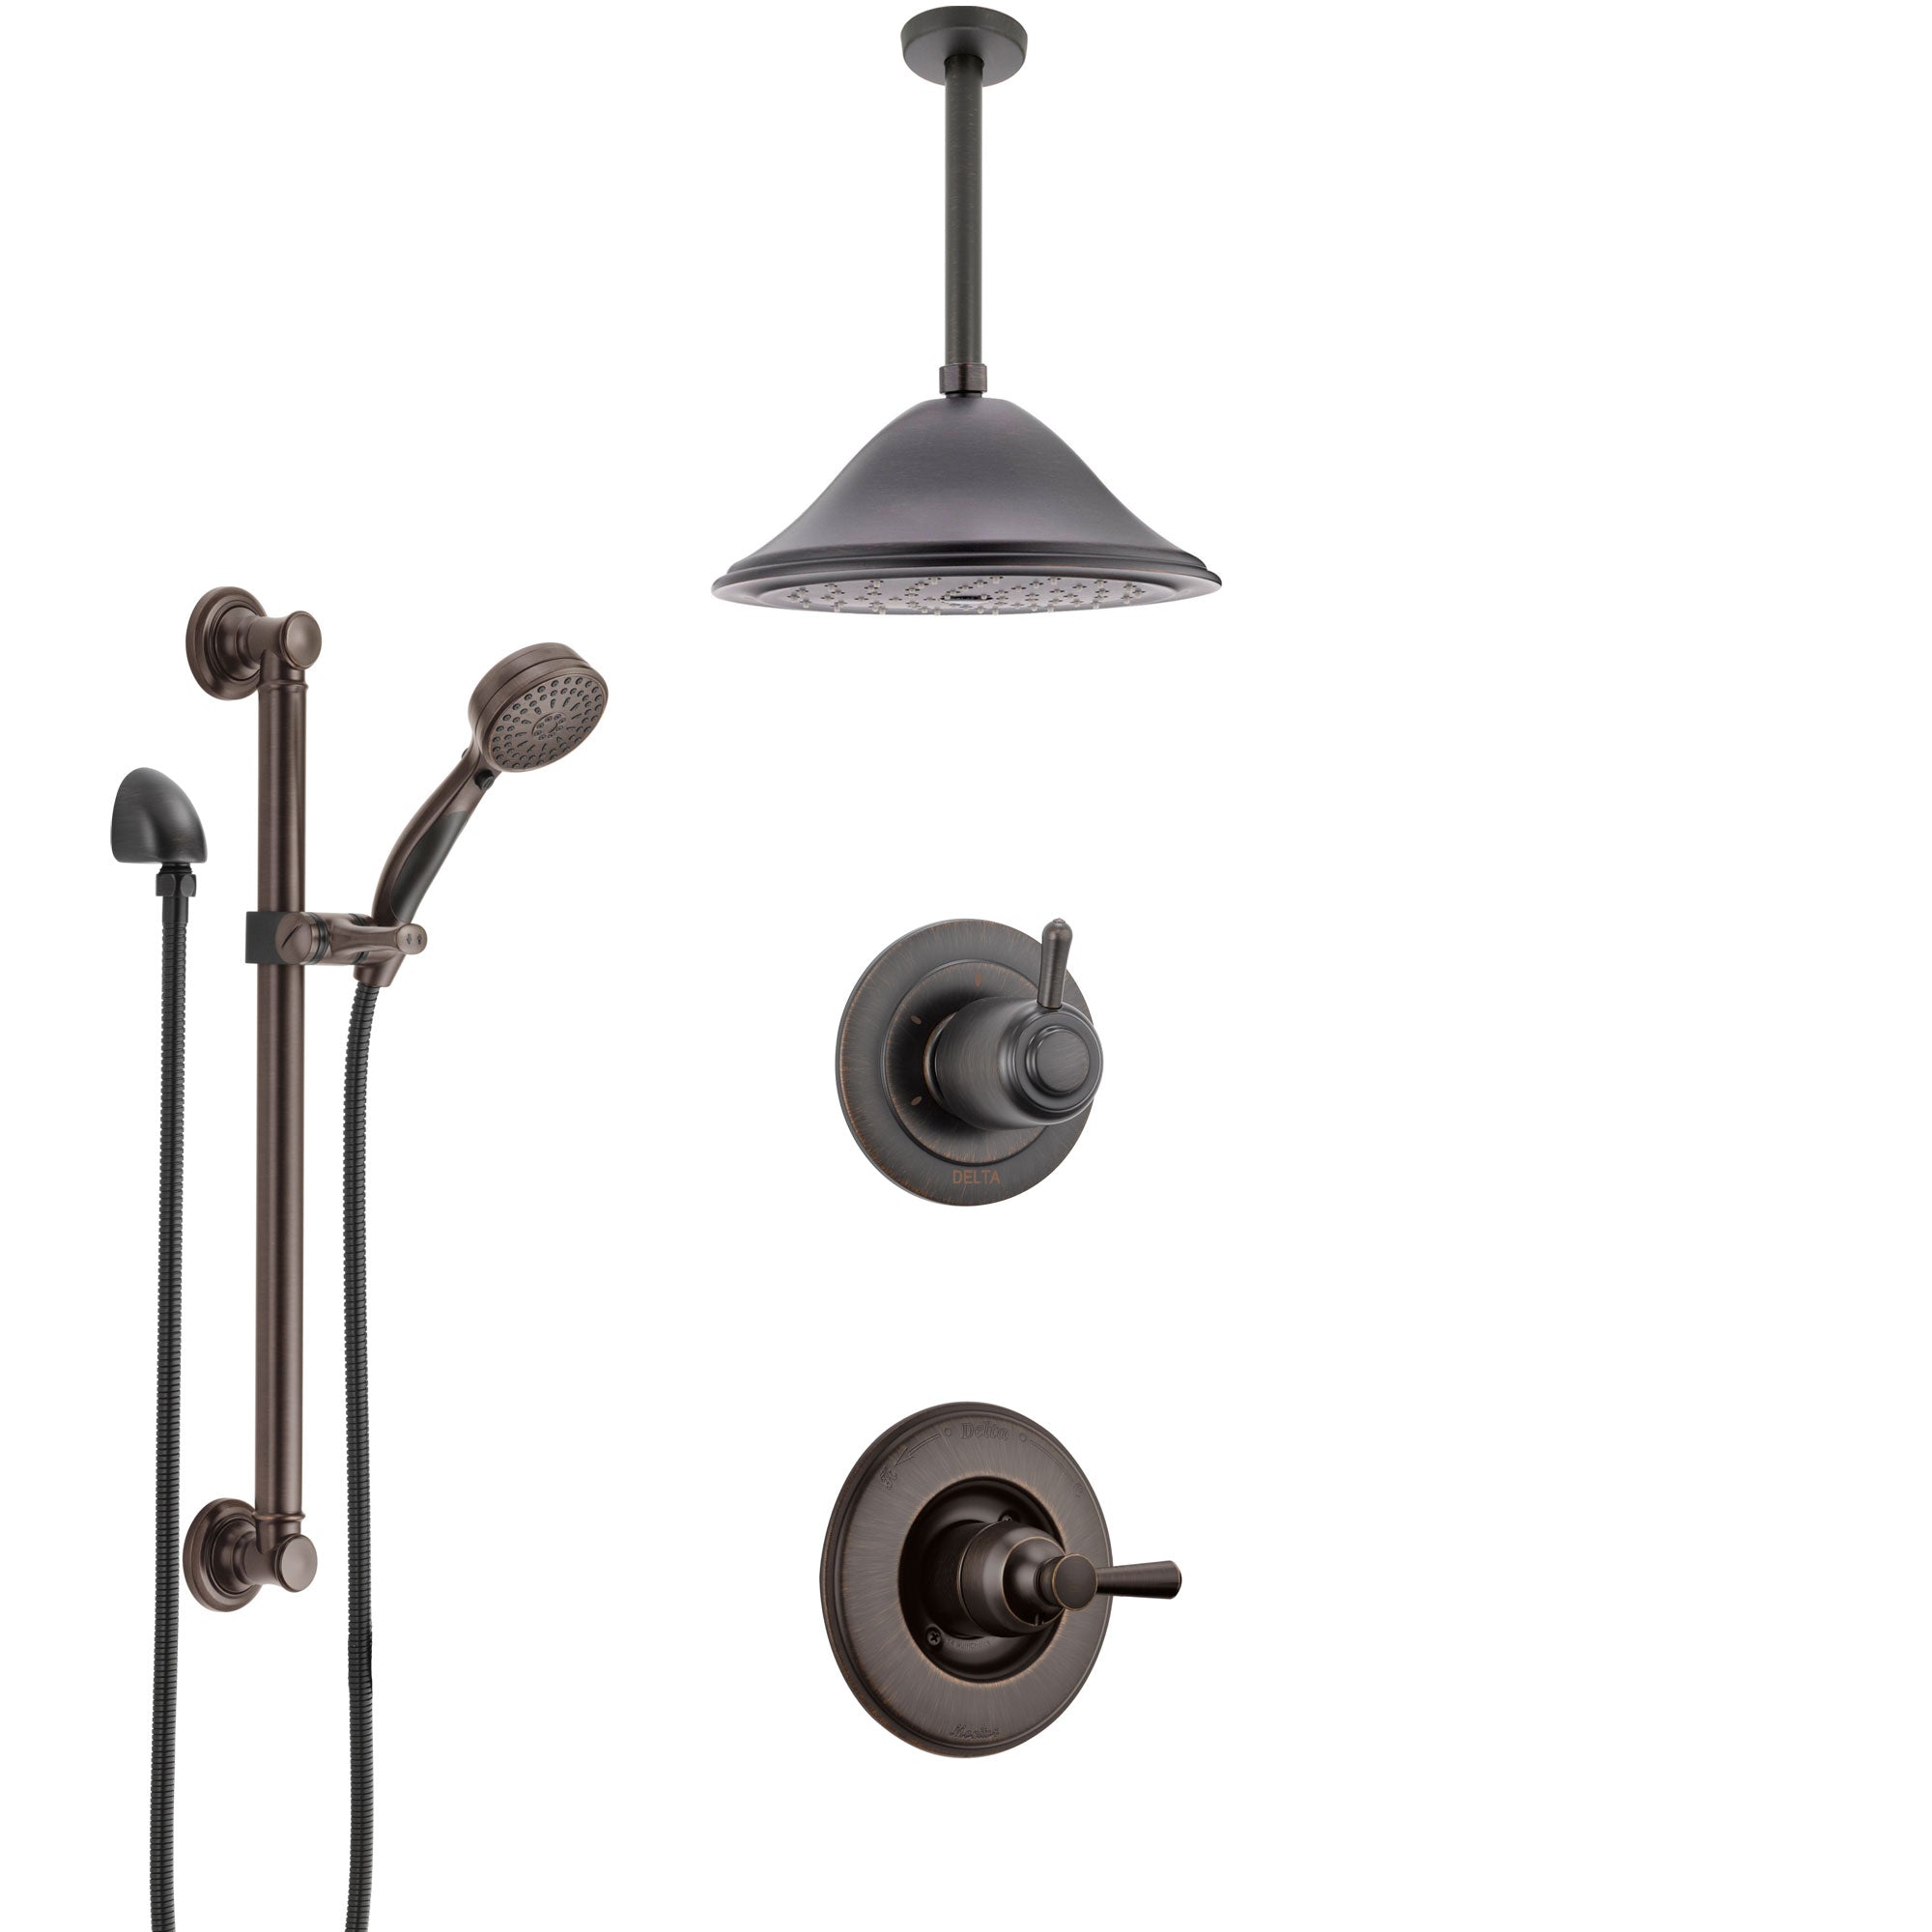 Delta Linden Venetian Bronze Shower System with Control Handle, 3-Setting Diverter, Ceiling Mount Showerhead, and Hand Shower with Grab Bar SS1493RB8